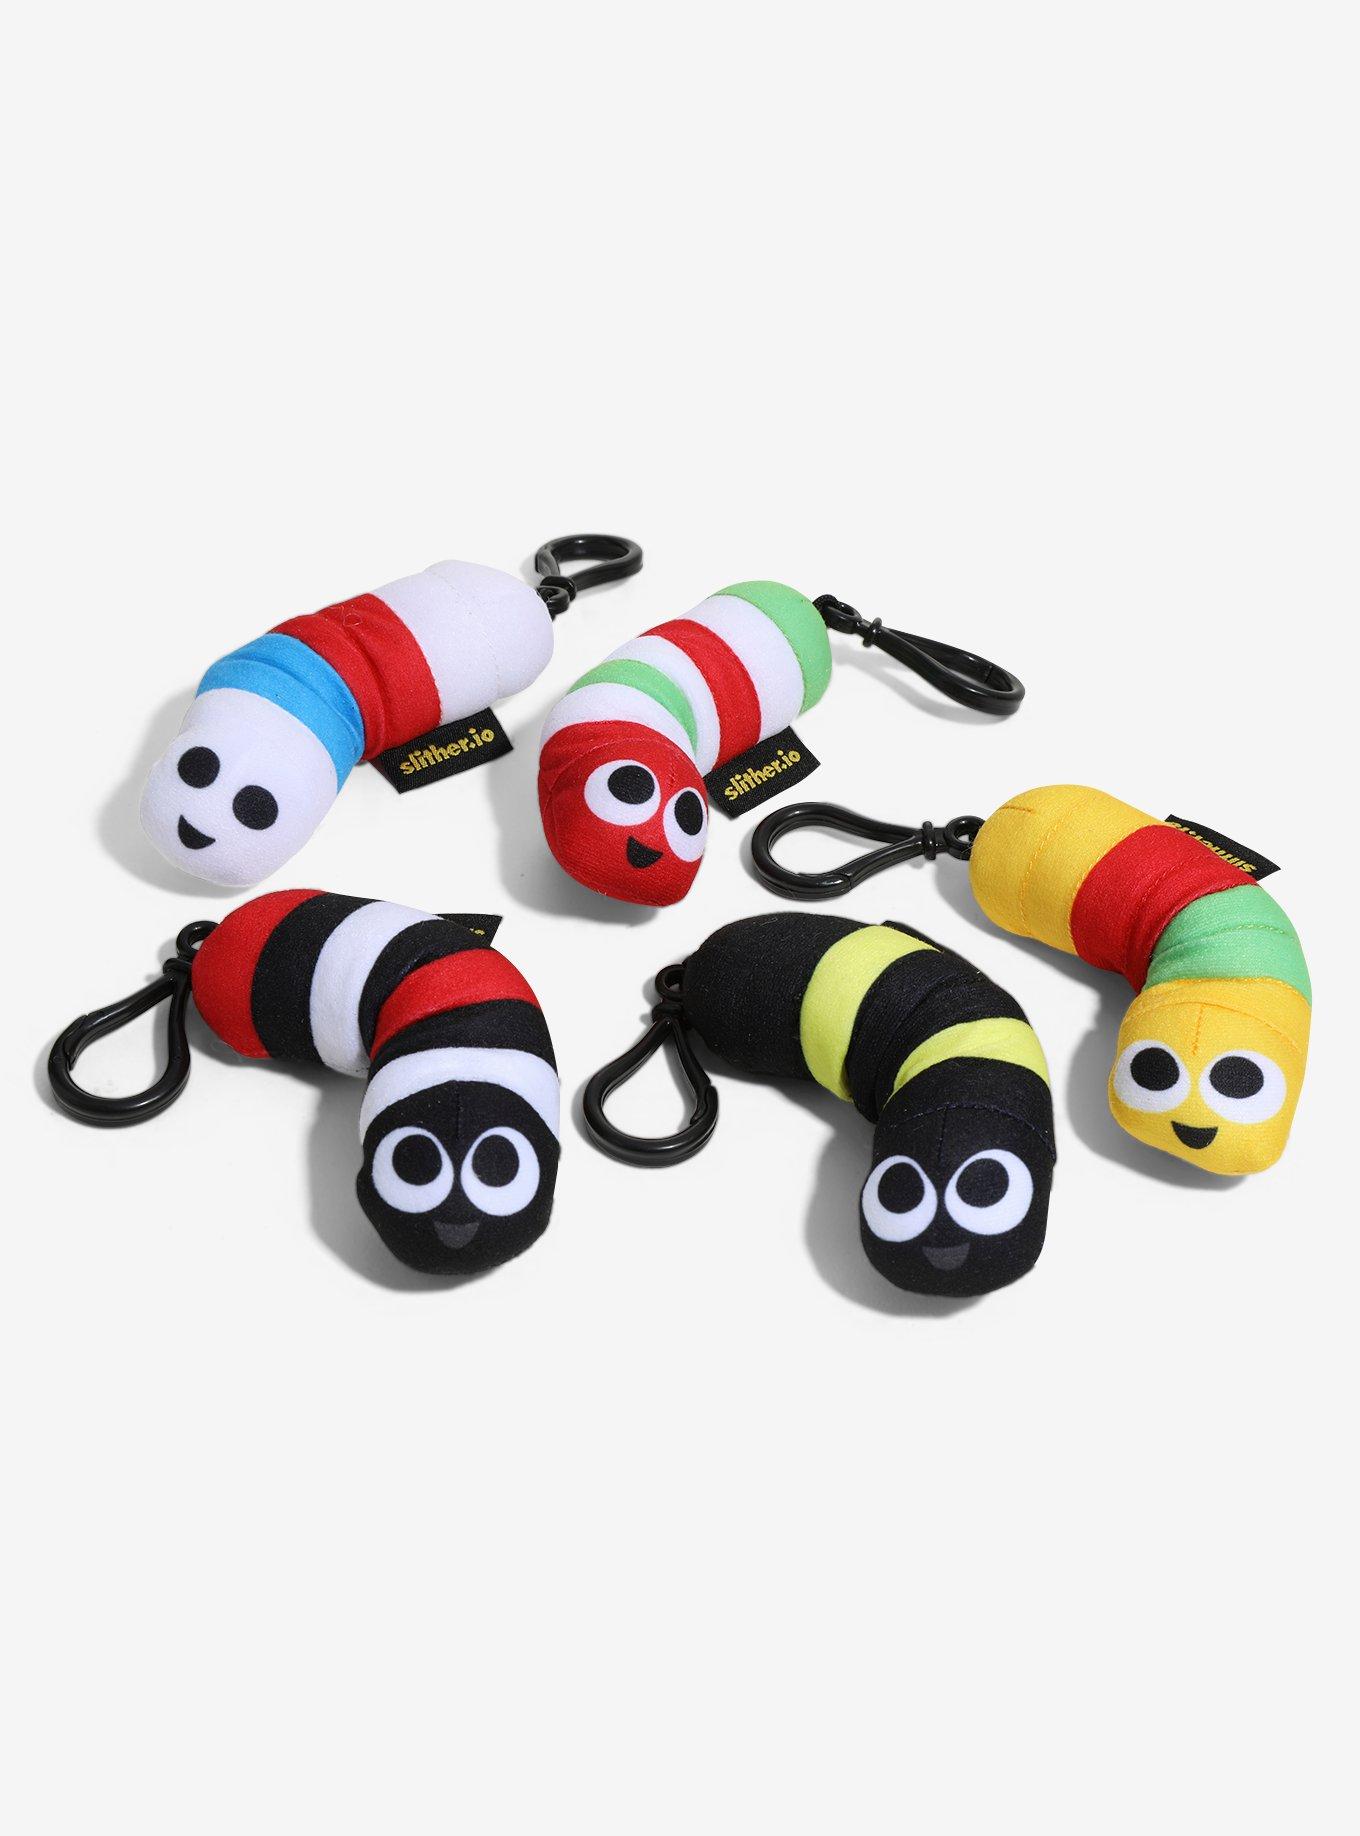 Slither.io Series 1 Blind Box Plush w/ Backpack Clip